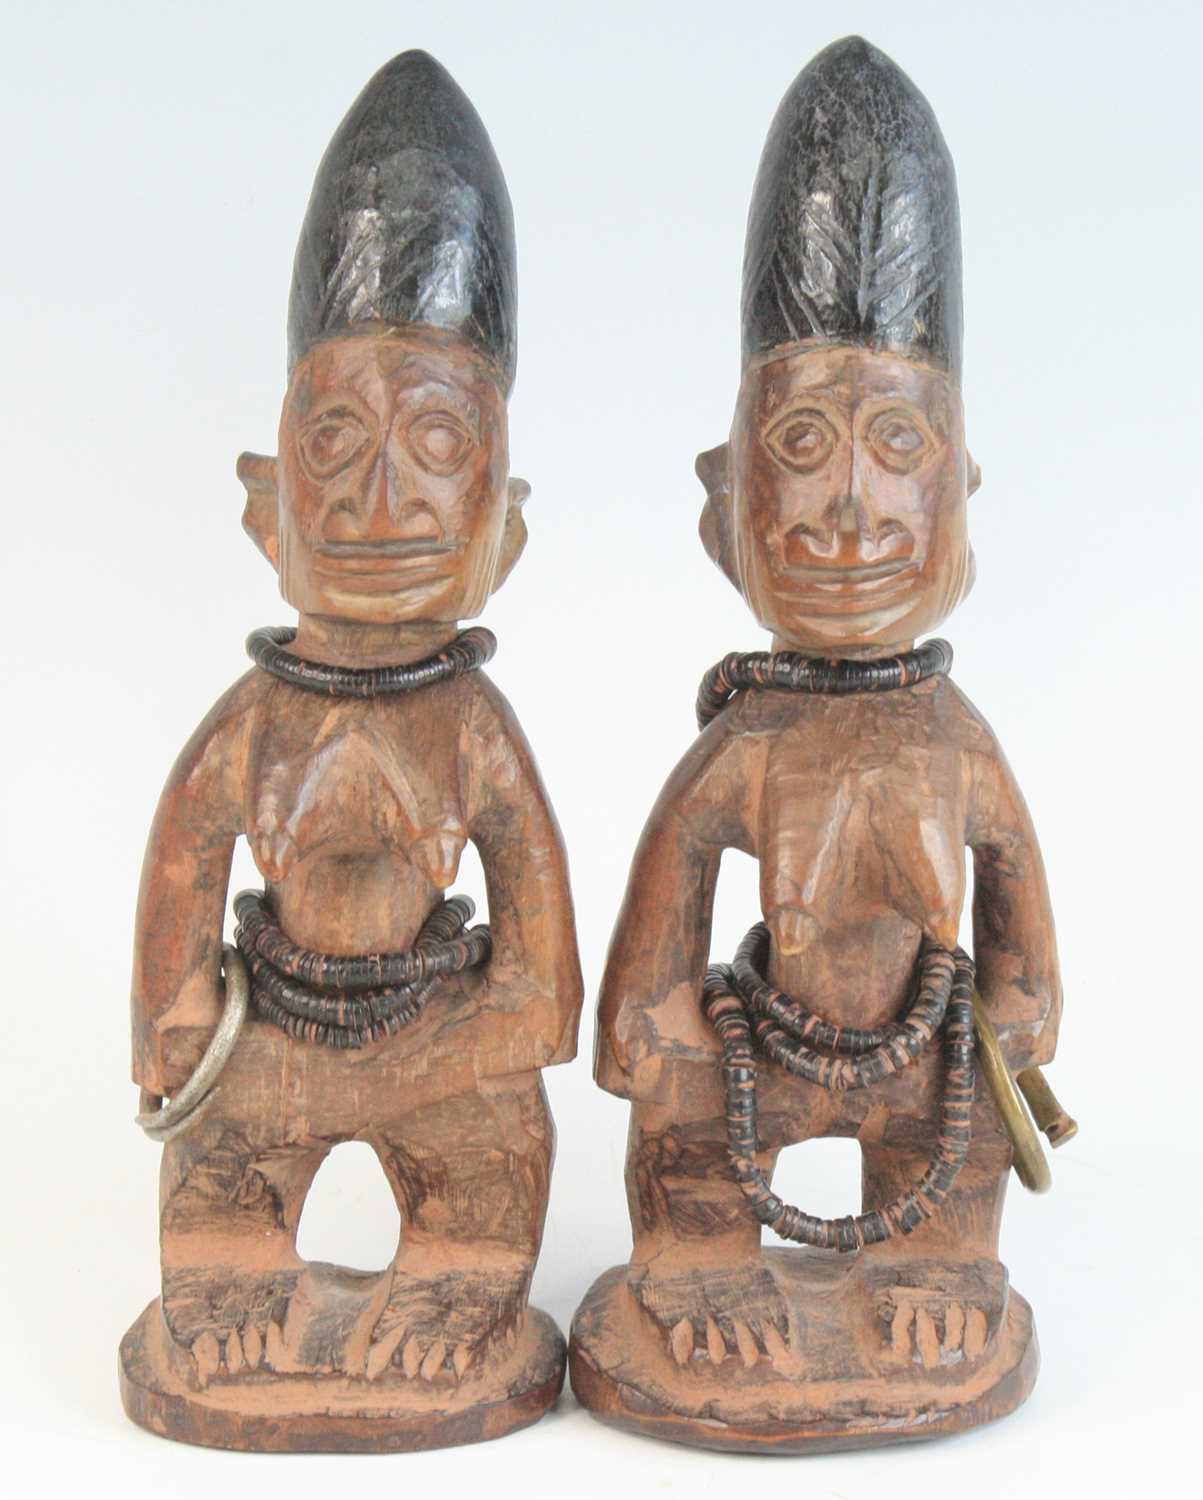 A pair of Ibeji figures, each carved as a female in standing pose with scarified cheeks and